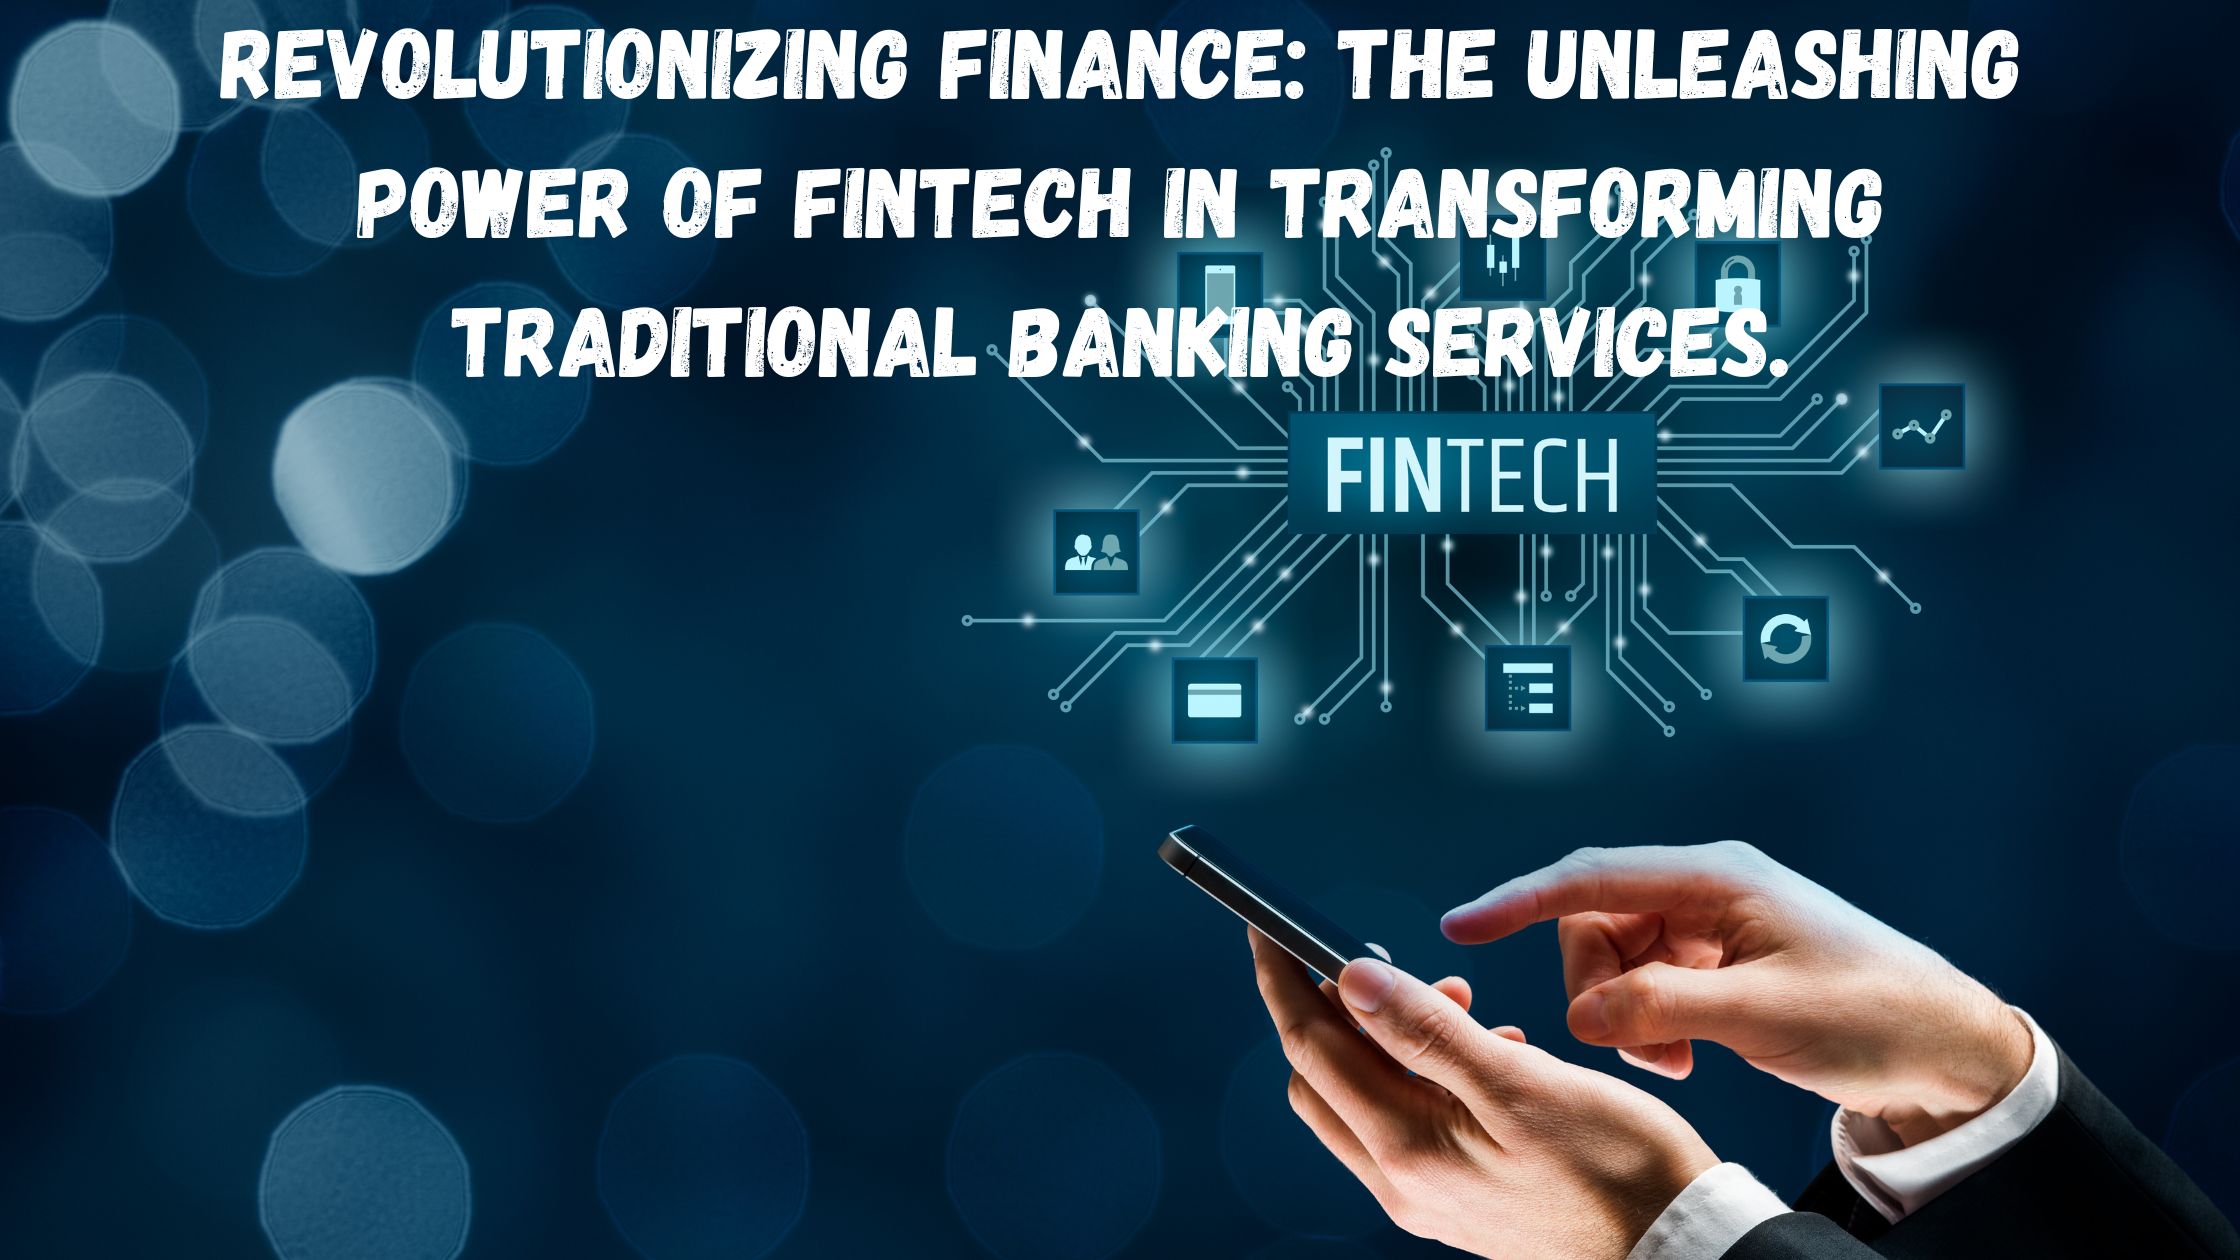 Revolutionizing Finance:The Unleashing Power of Fintech in Transforming Traditional Banking Services